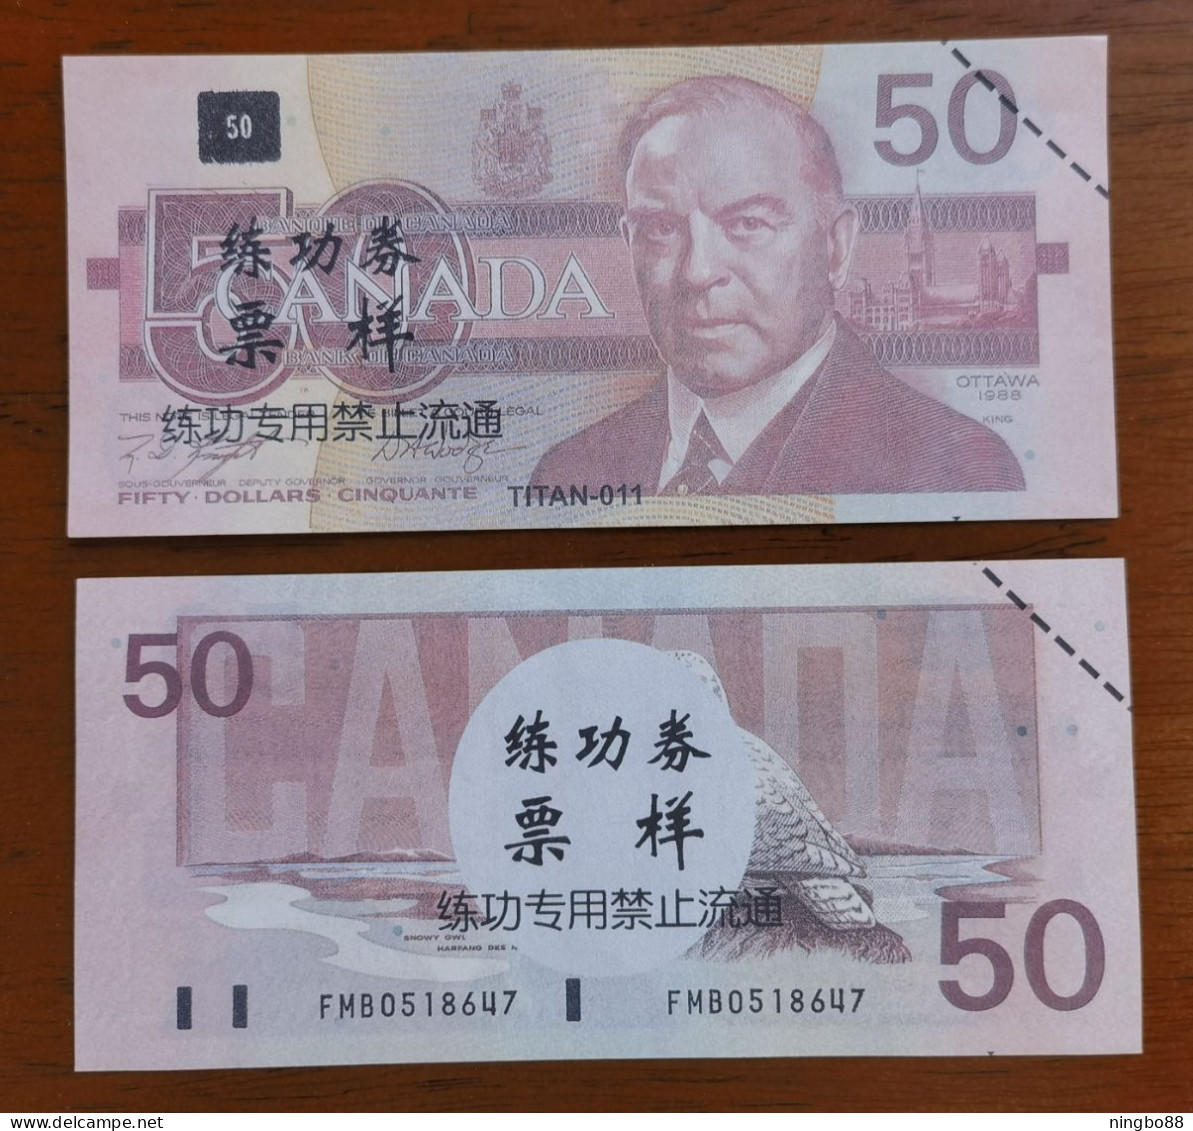 China BOC Bank (bank Of China) Training/test Banknote,Canada Dollars D-1 Series $50 Note Specimen Overprint - Canada